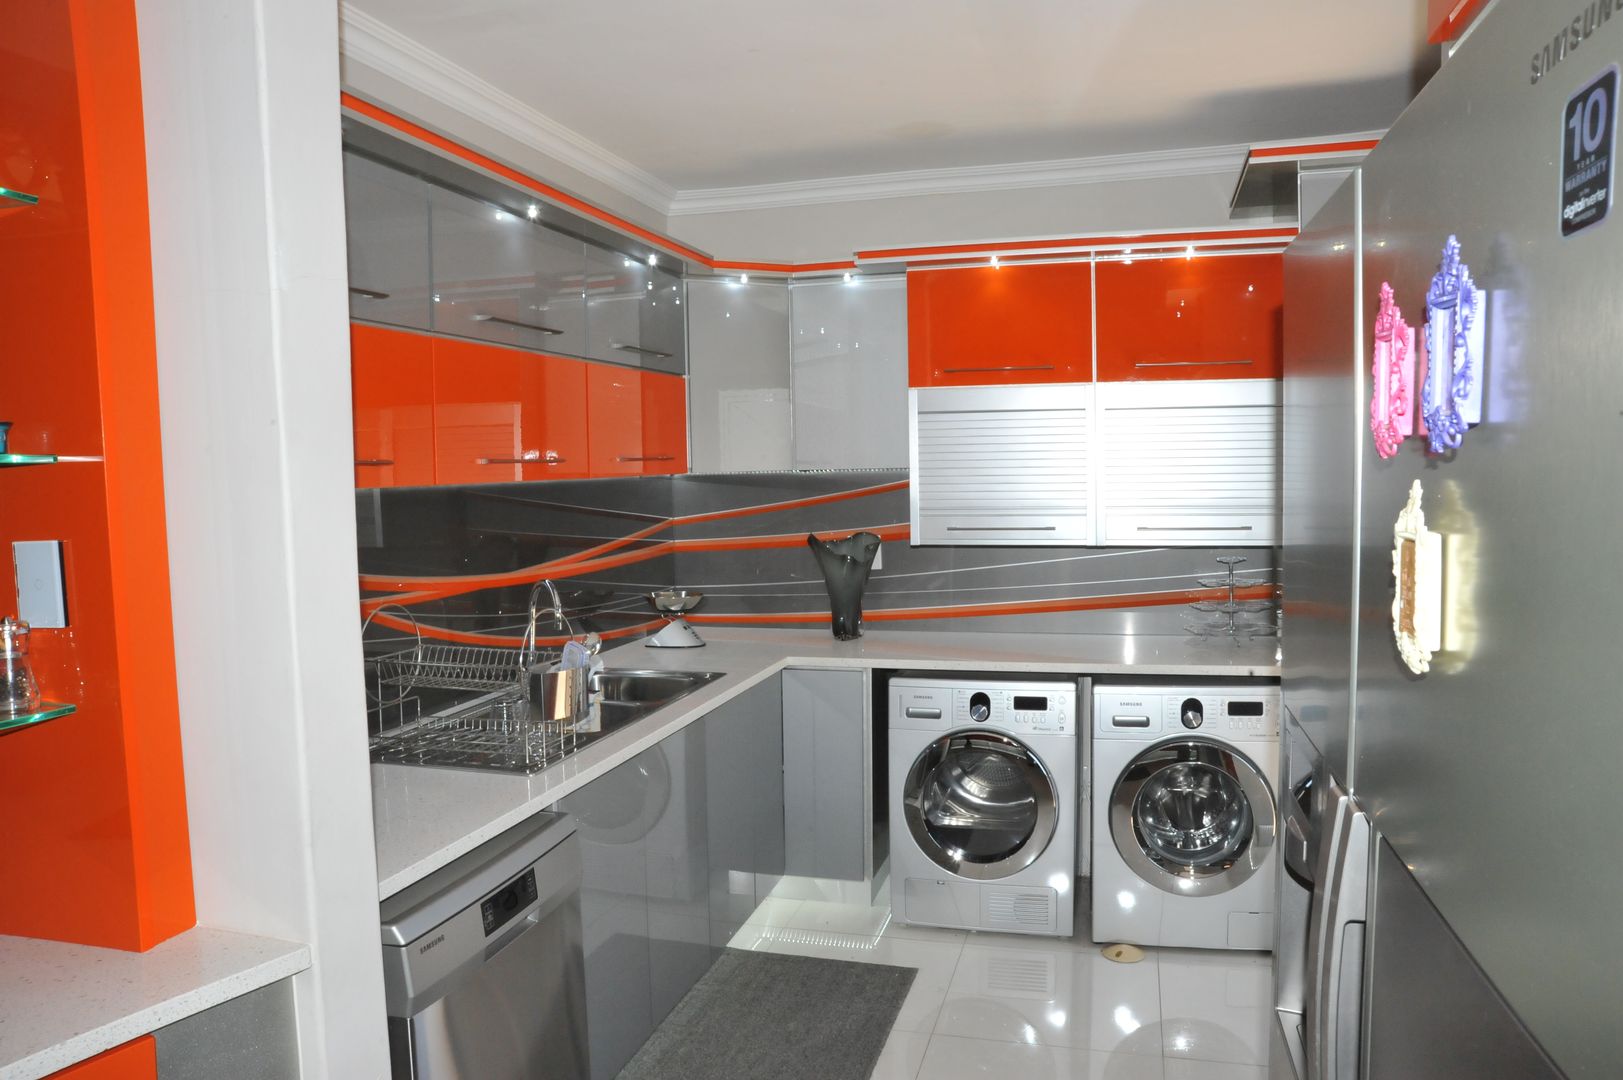 Orange and Silver Niemann Kitchen with Cesar Stone Work Tops., Expert Kitchens and Interiors Expert Kitchens and Interiors モダンな キッチン